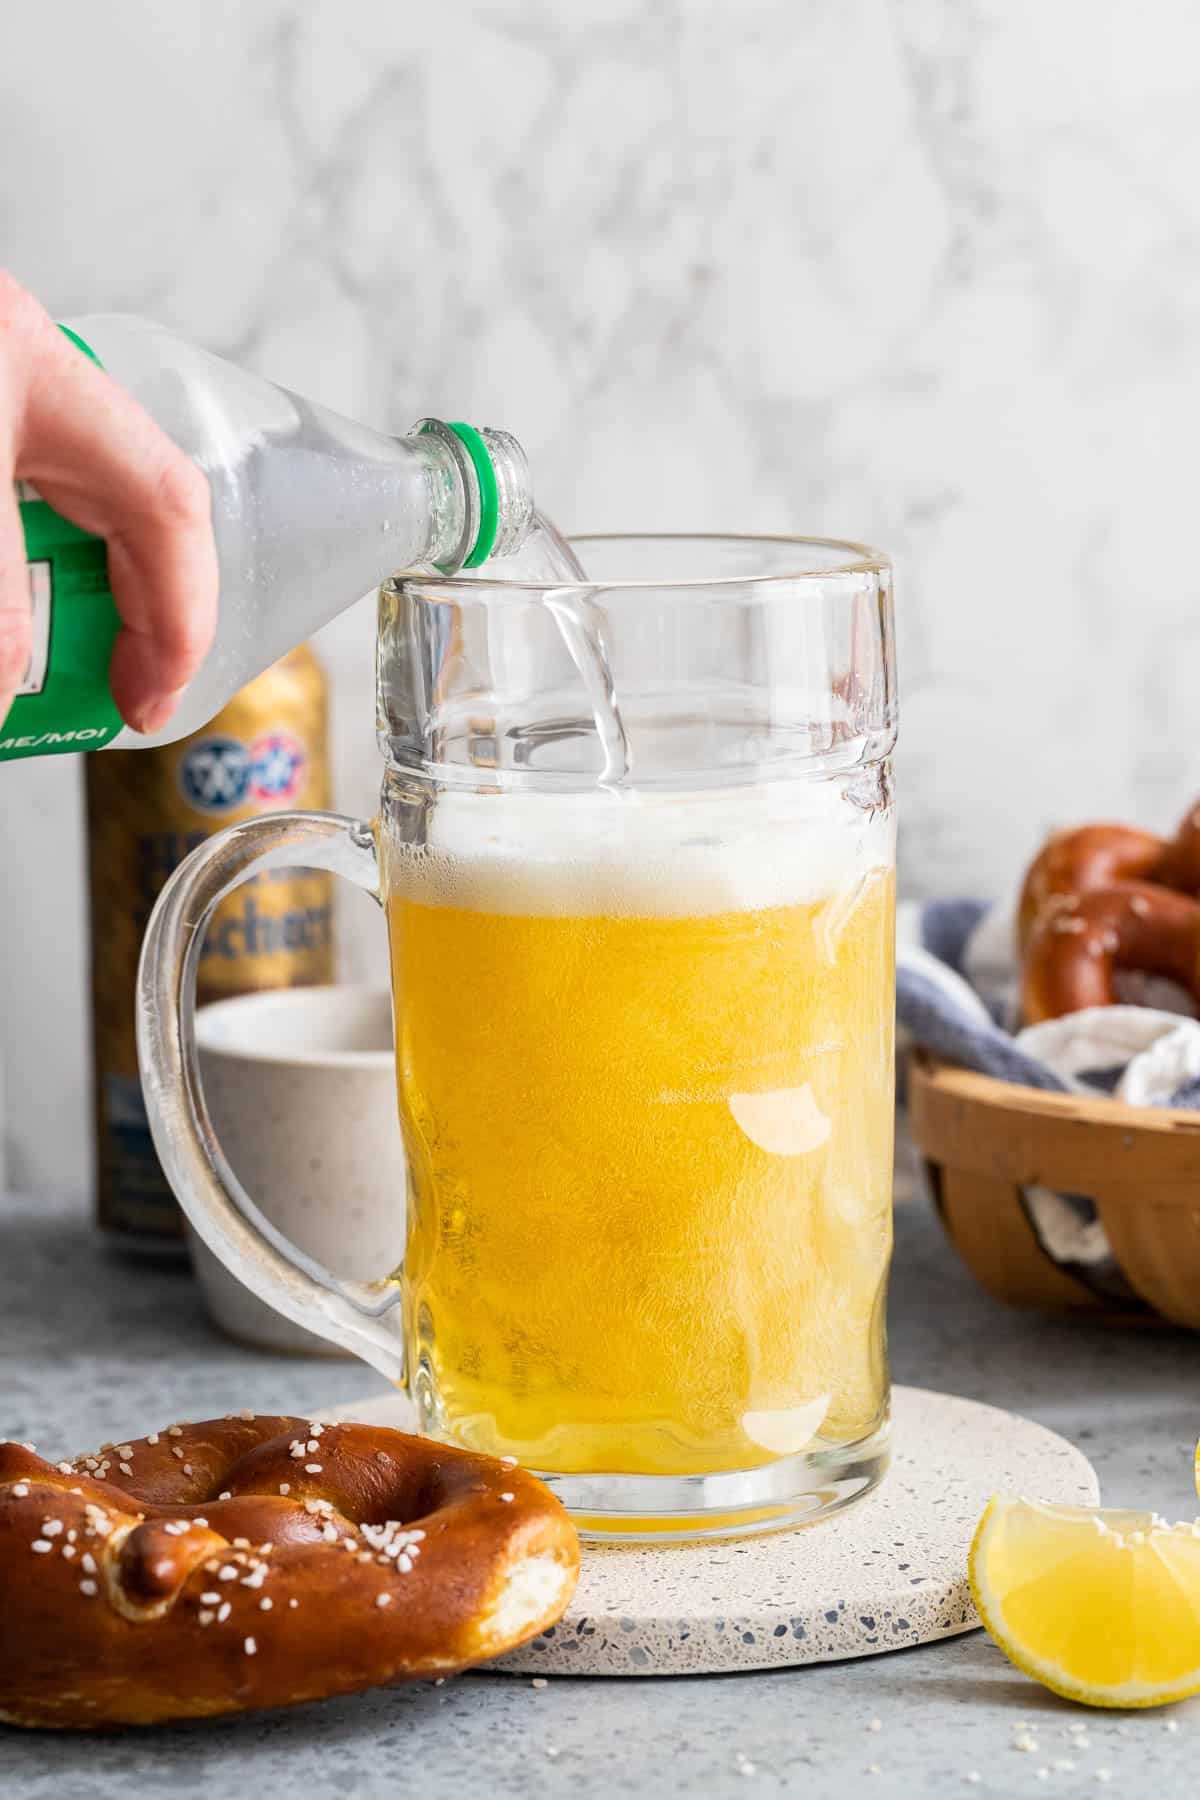 Sparkling lemonade being poured into a beer stein filled with beer.